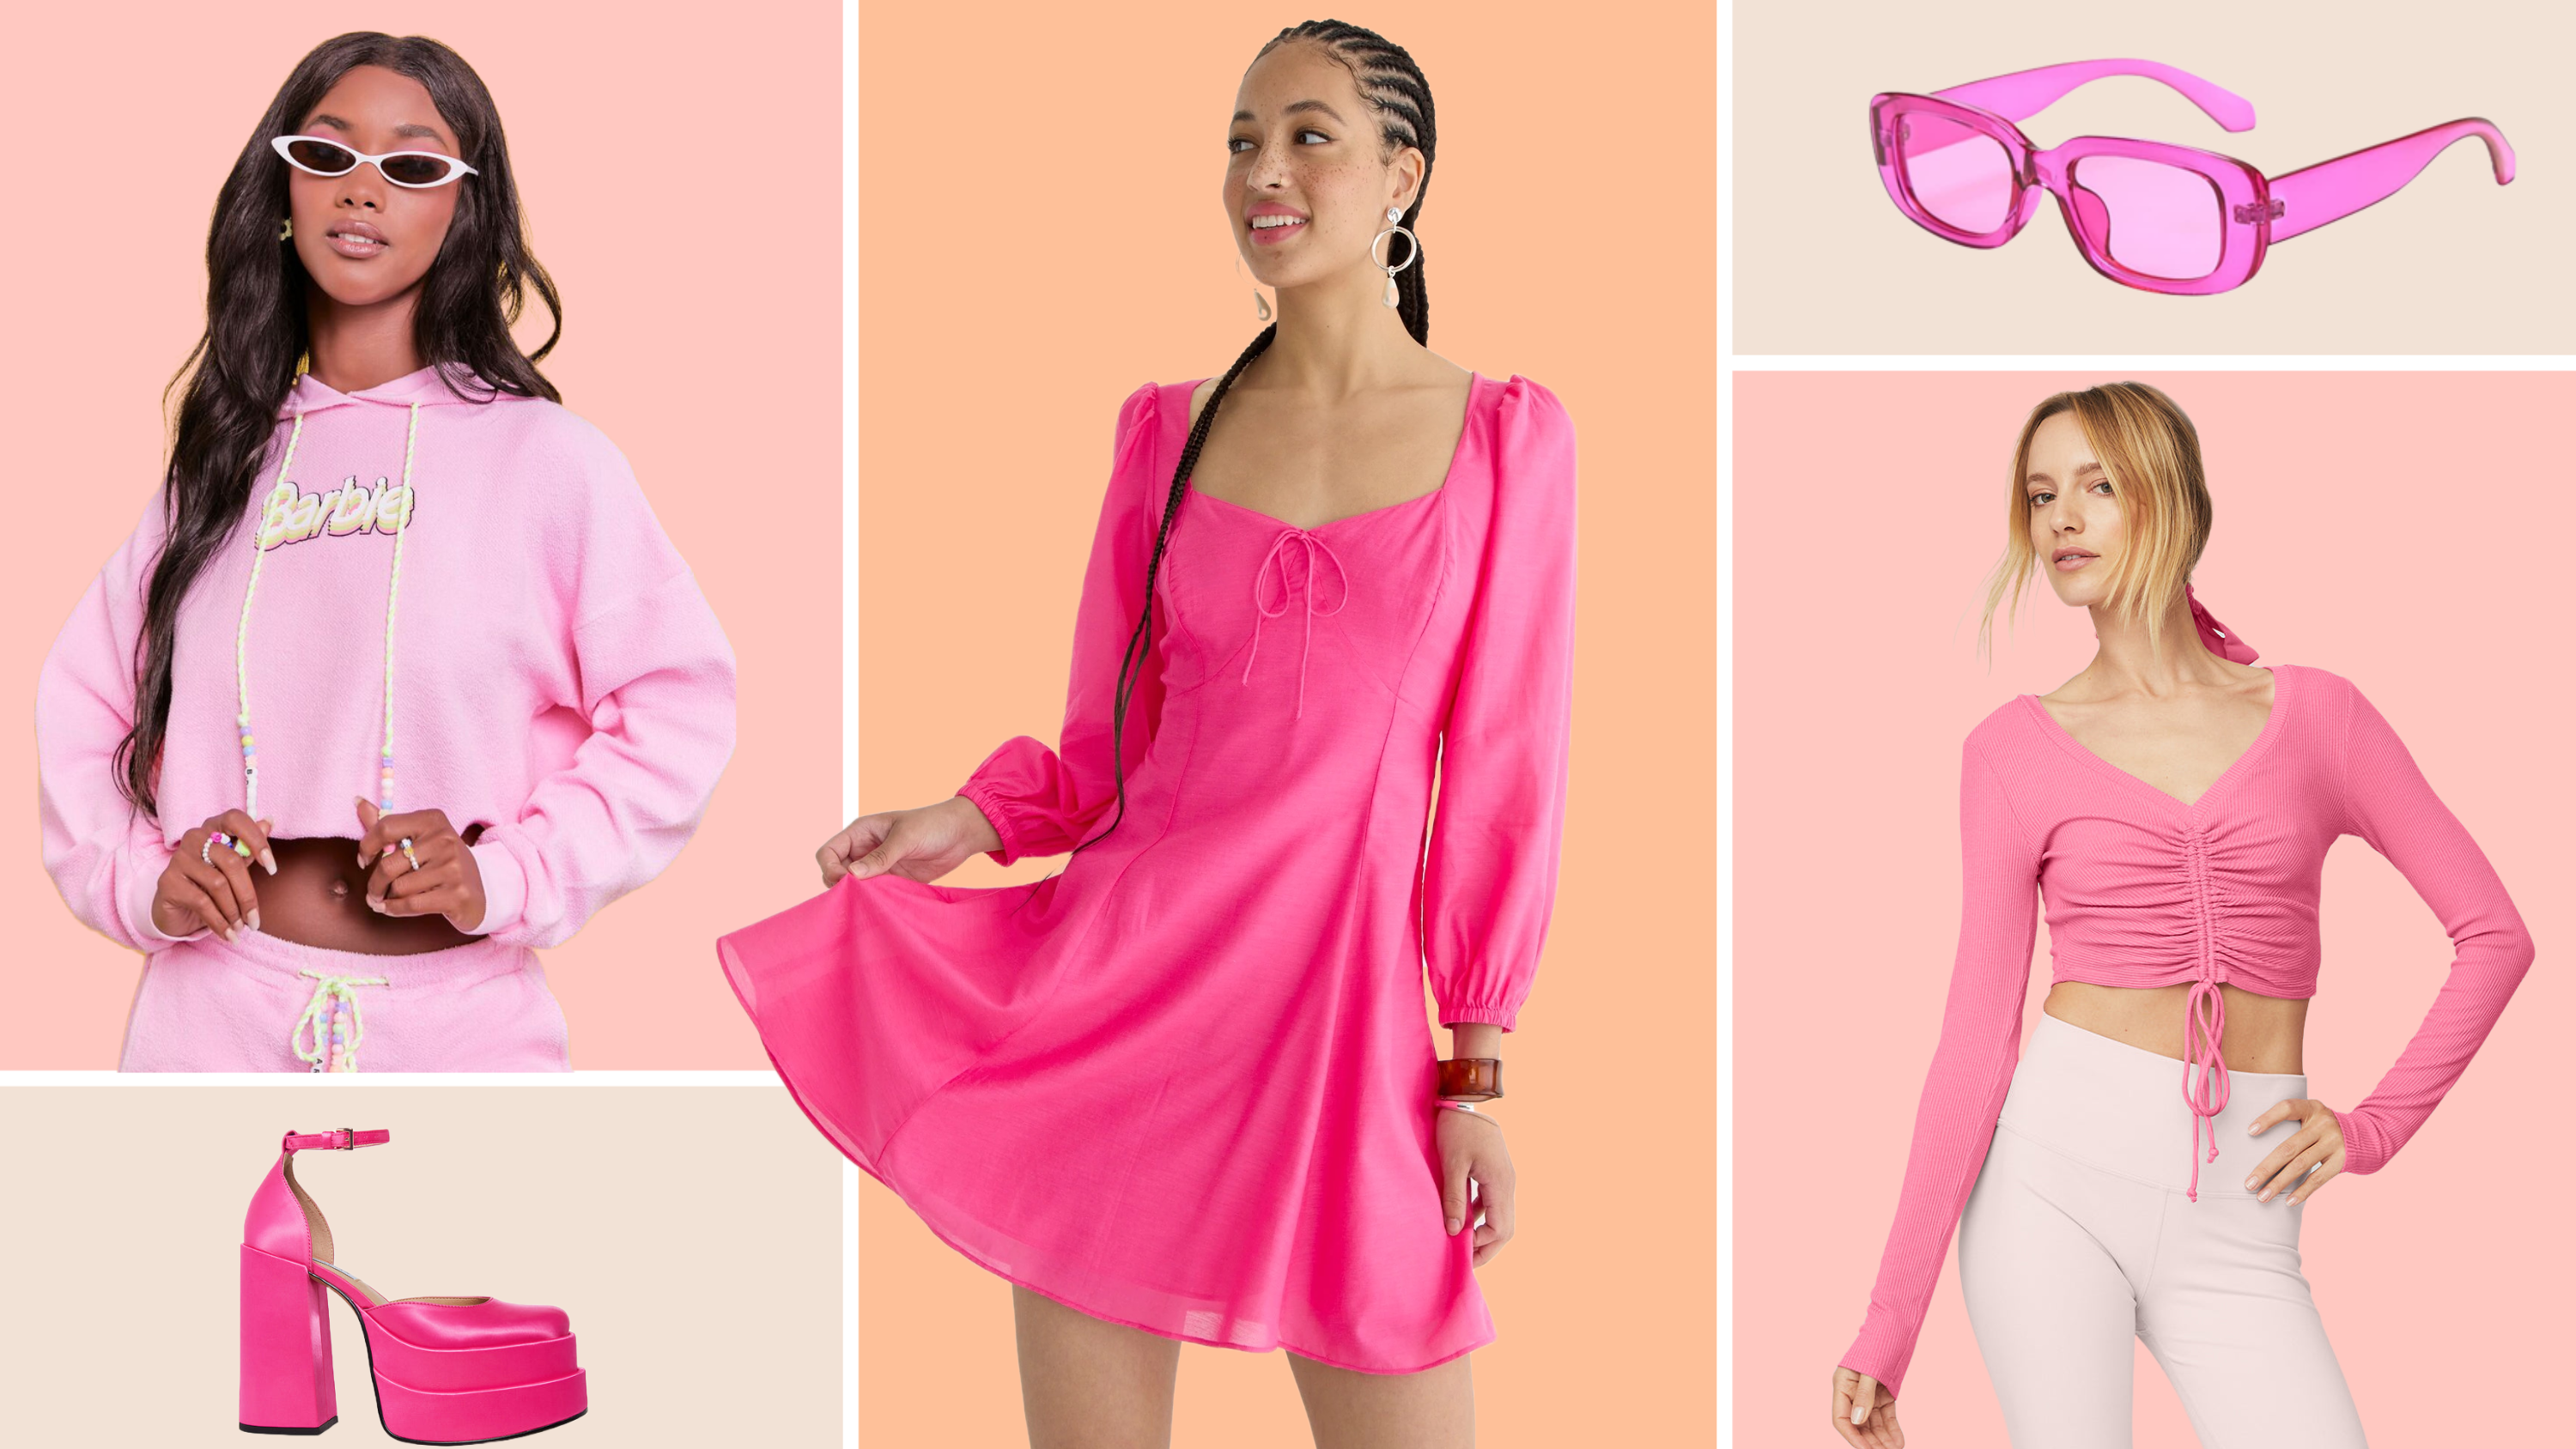 Rock the Barbiecore trend with these bright pink styles